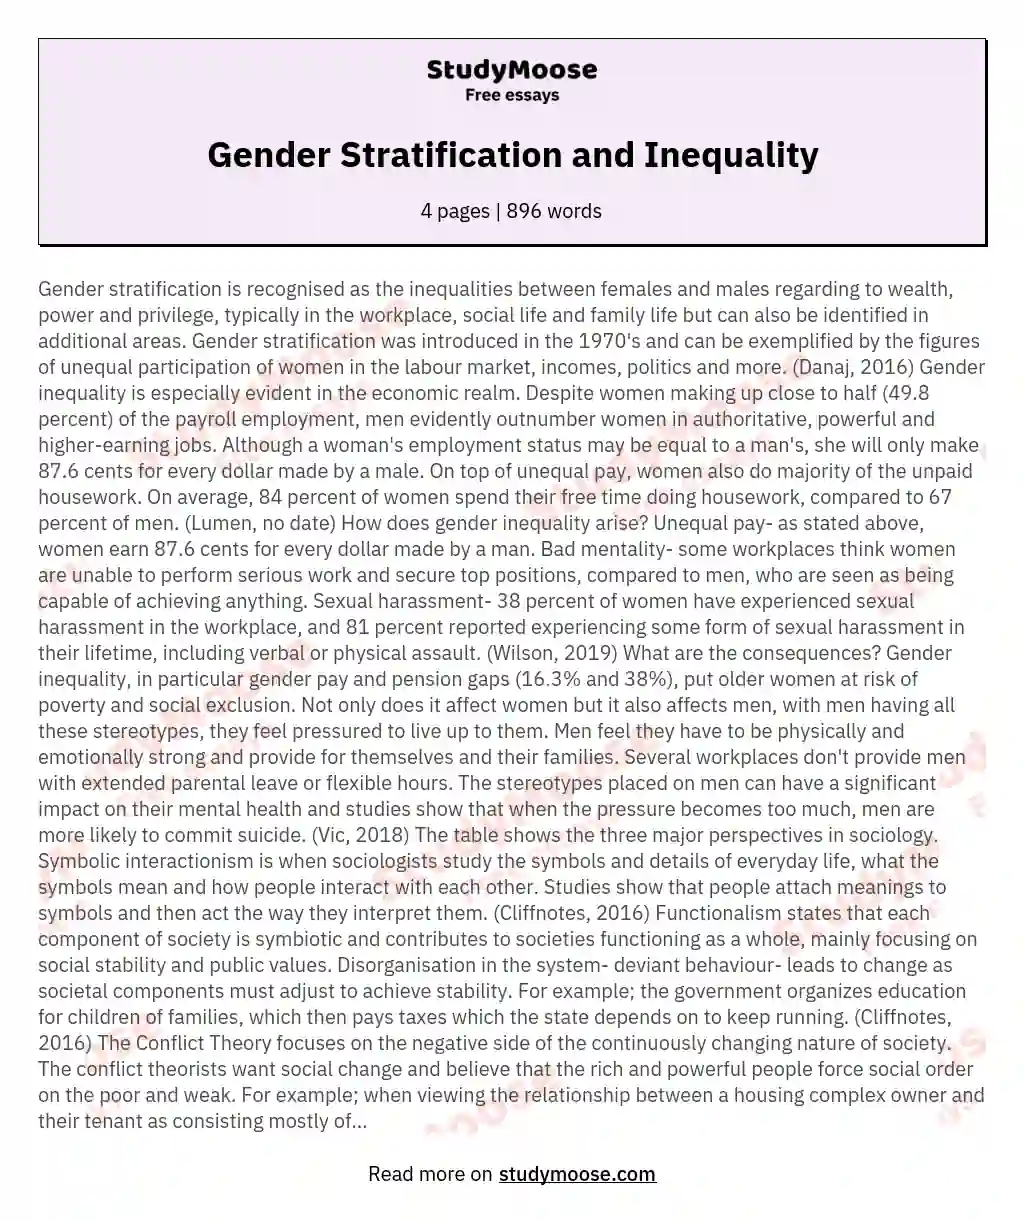 Gender Stratification and Inequality